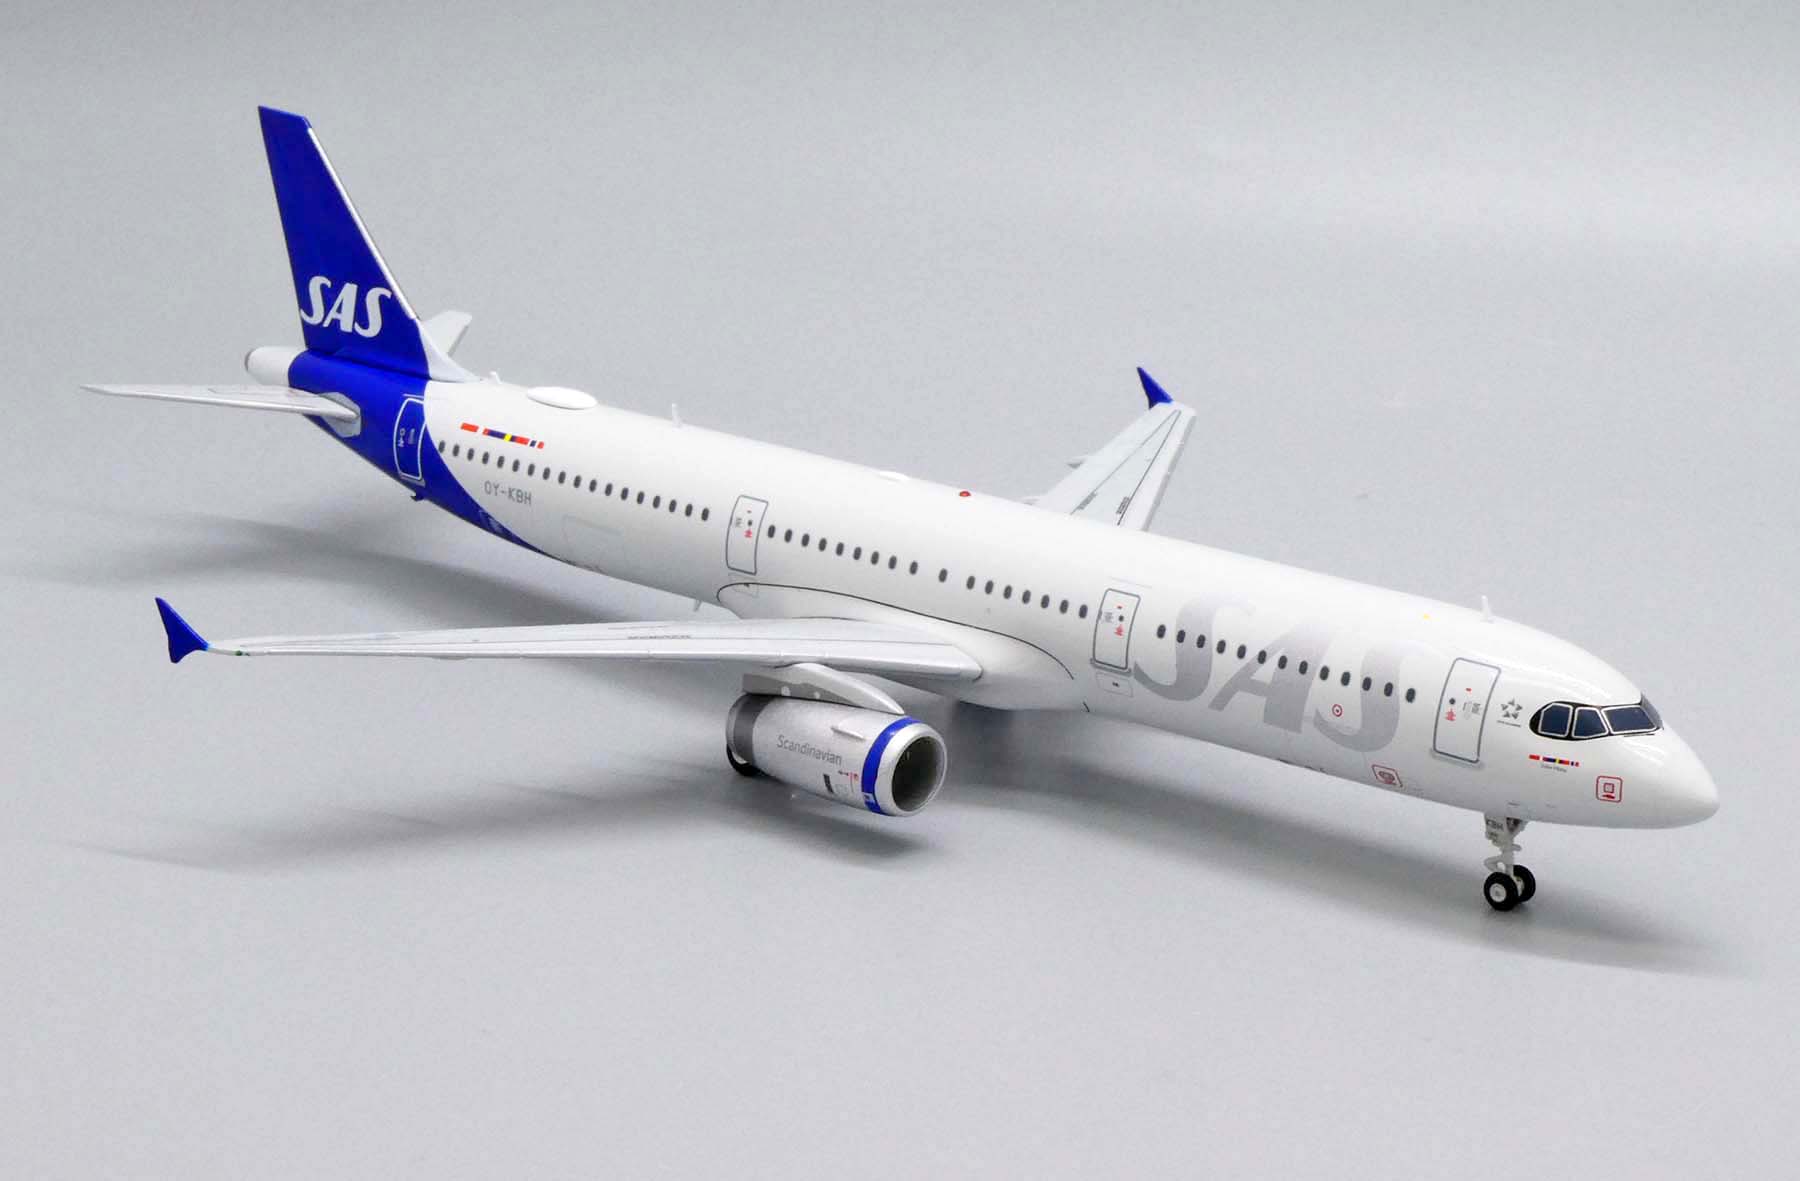 JC WINGS JCLH2026 1/200 V-AIR AIRBUS A321-200 B-22610 WITH STAND 